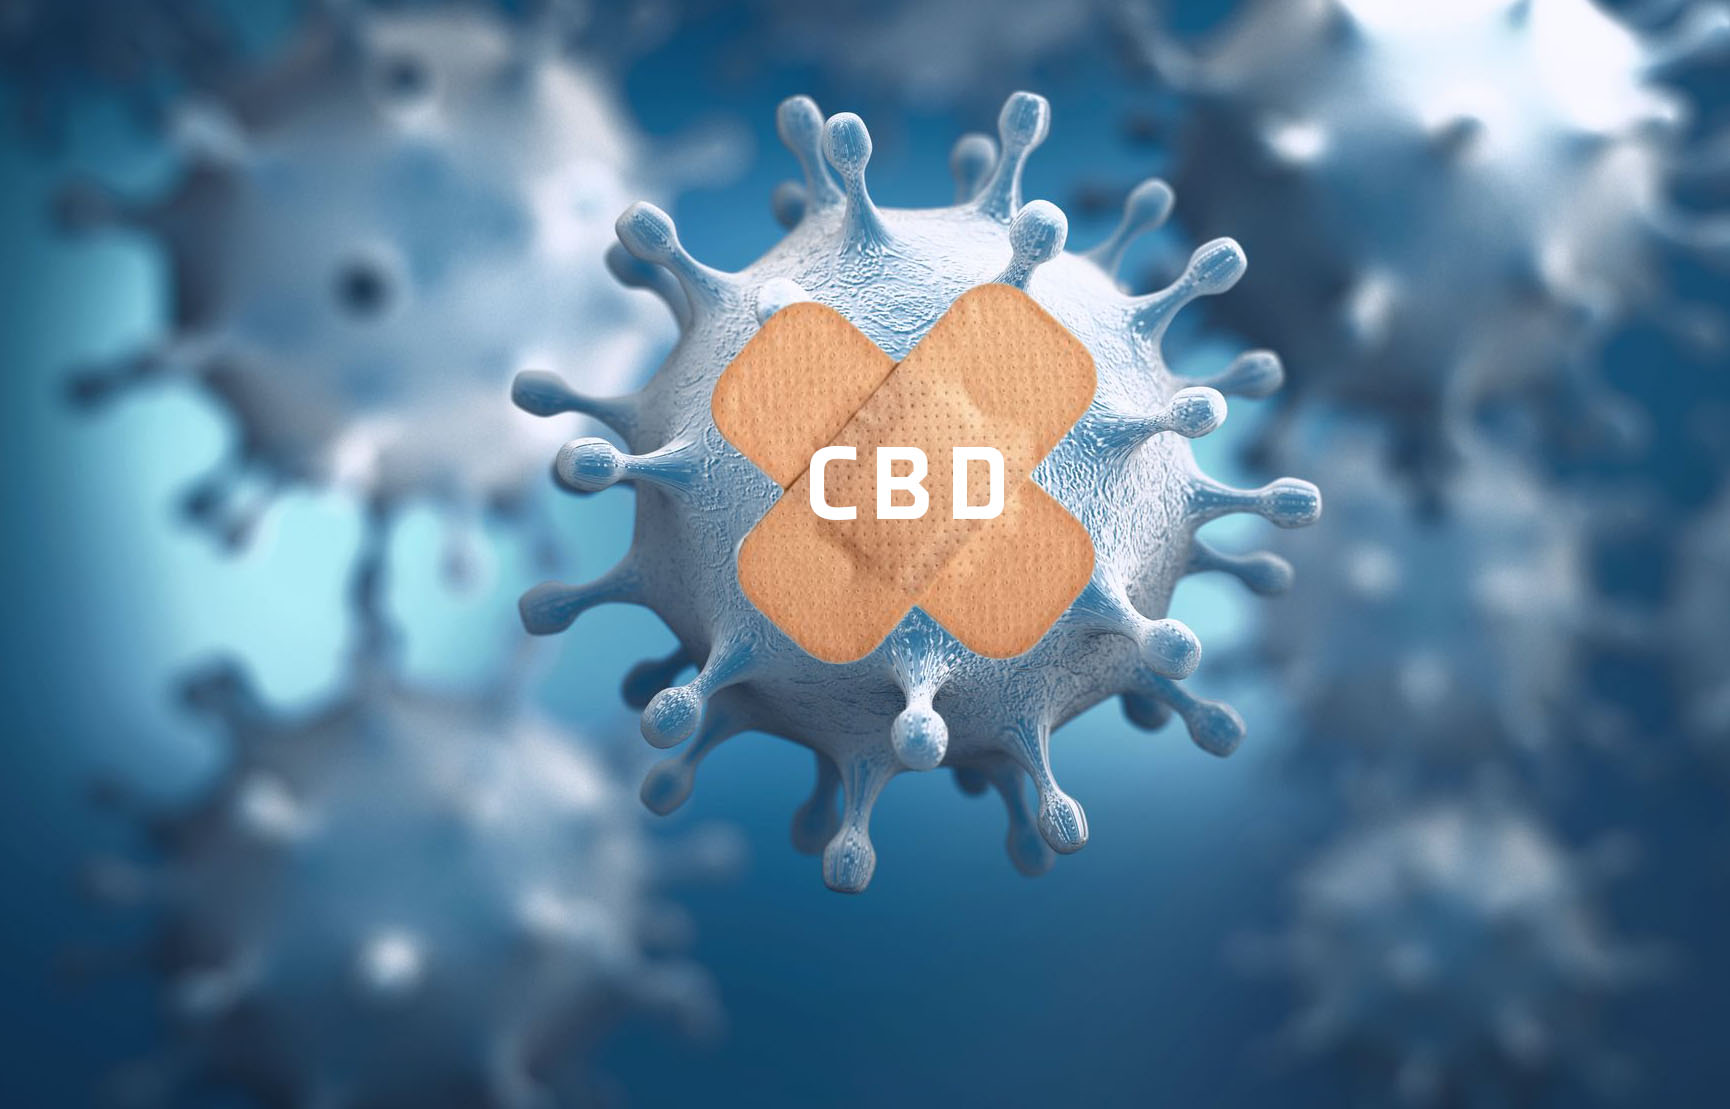 Studies Reveal CBD May Protect Against COVID-19; OC Wellness Solutions' CBD Tinctures and Oils Available